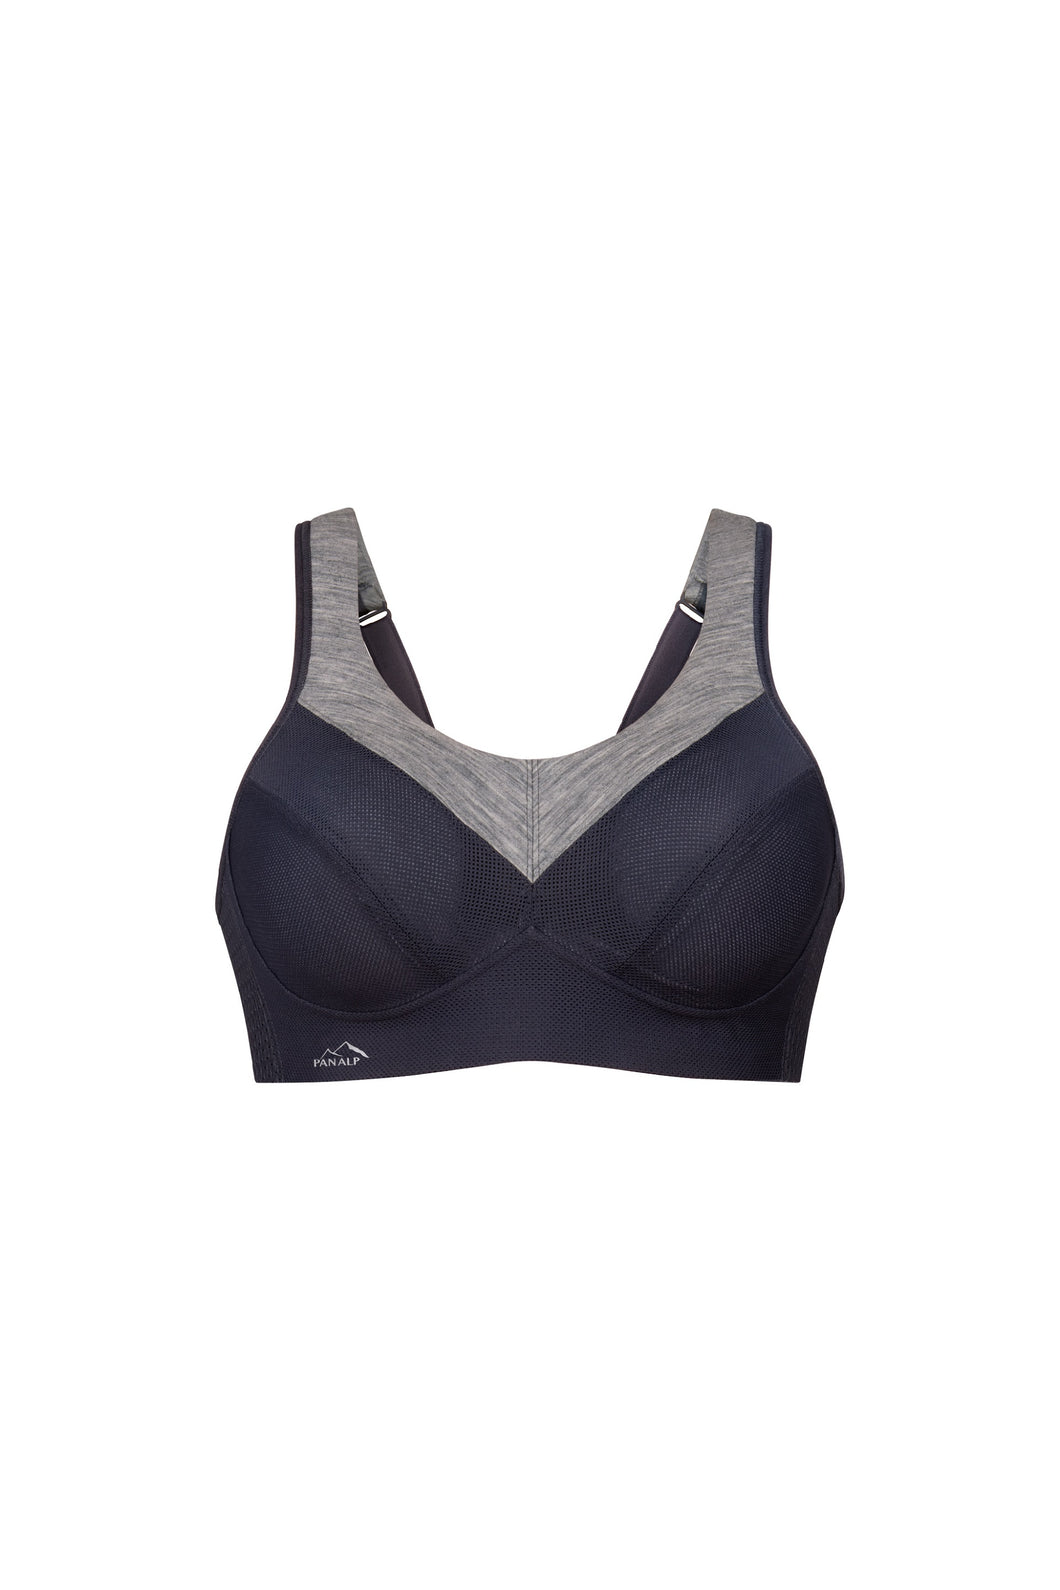 Plain Non-Padded Needytime Poly Cotton B Cup Sports Bra at Rs 58